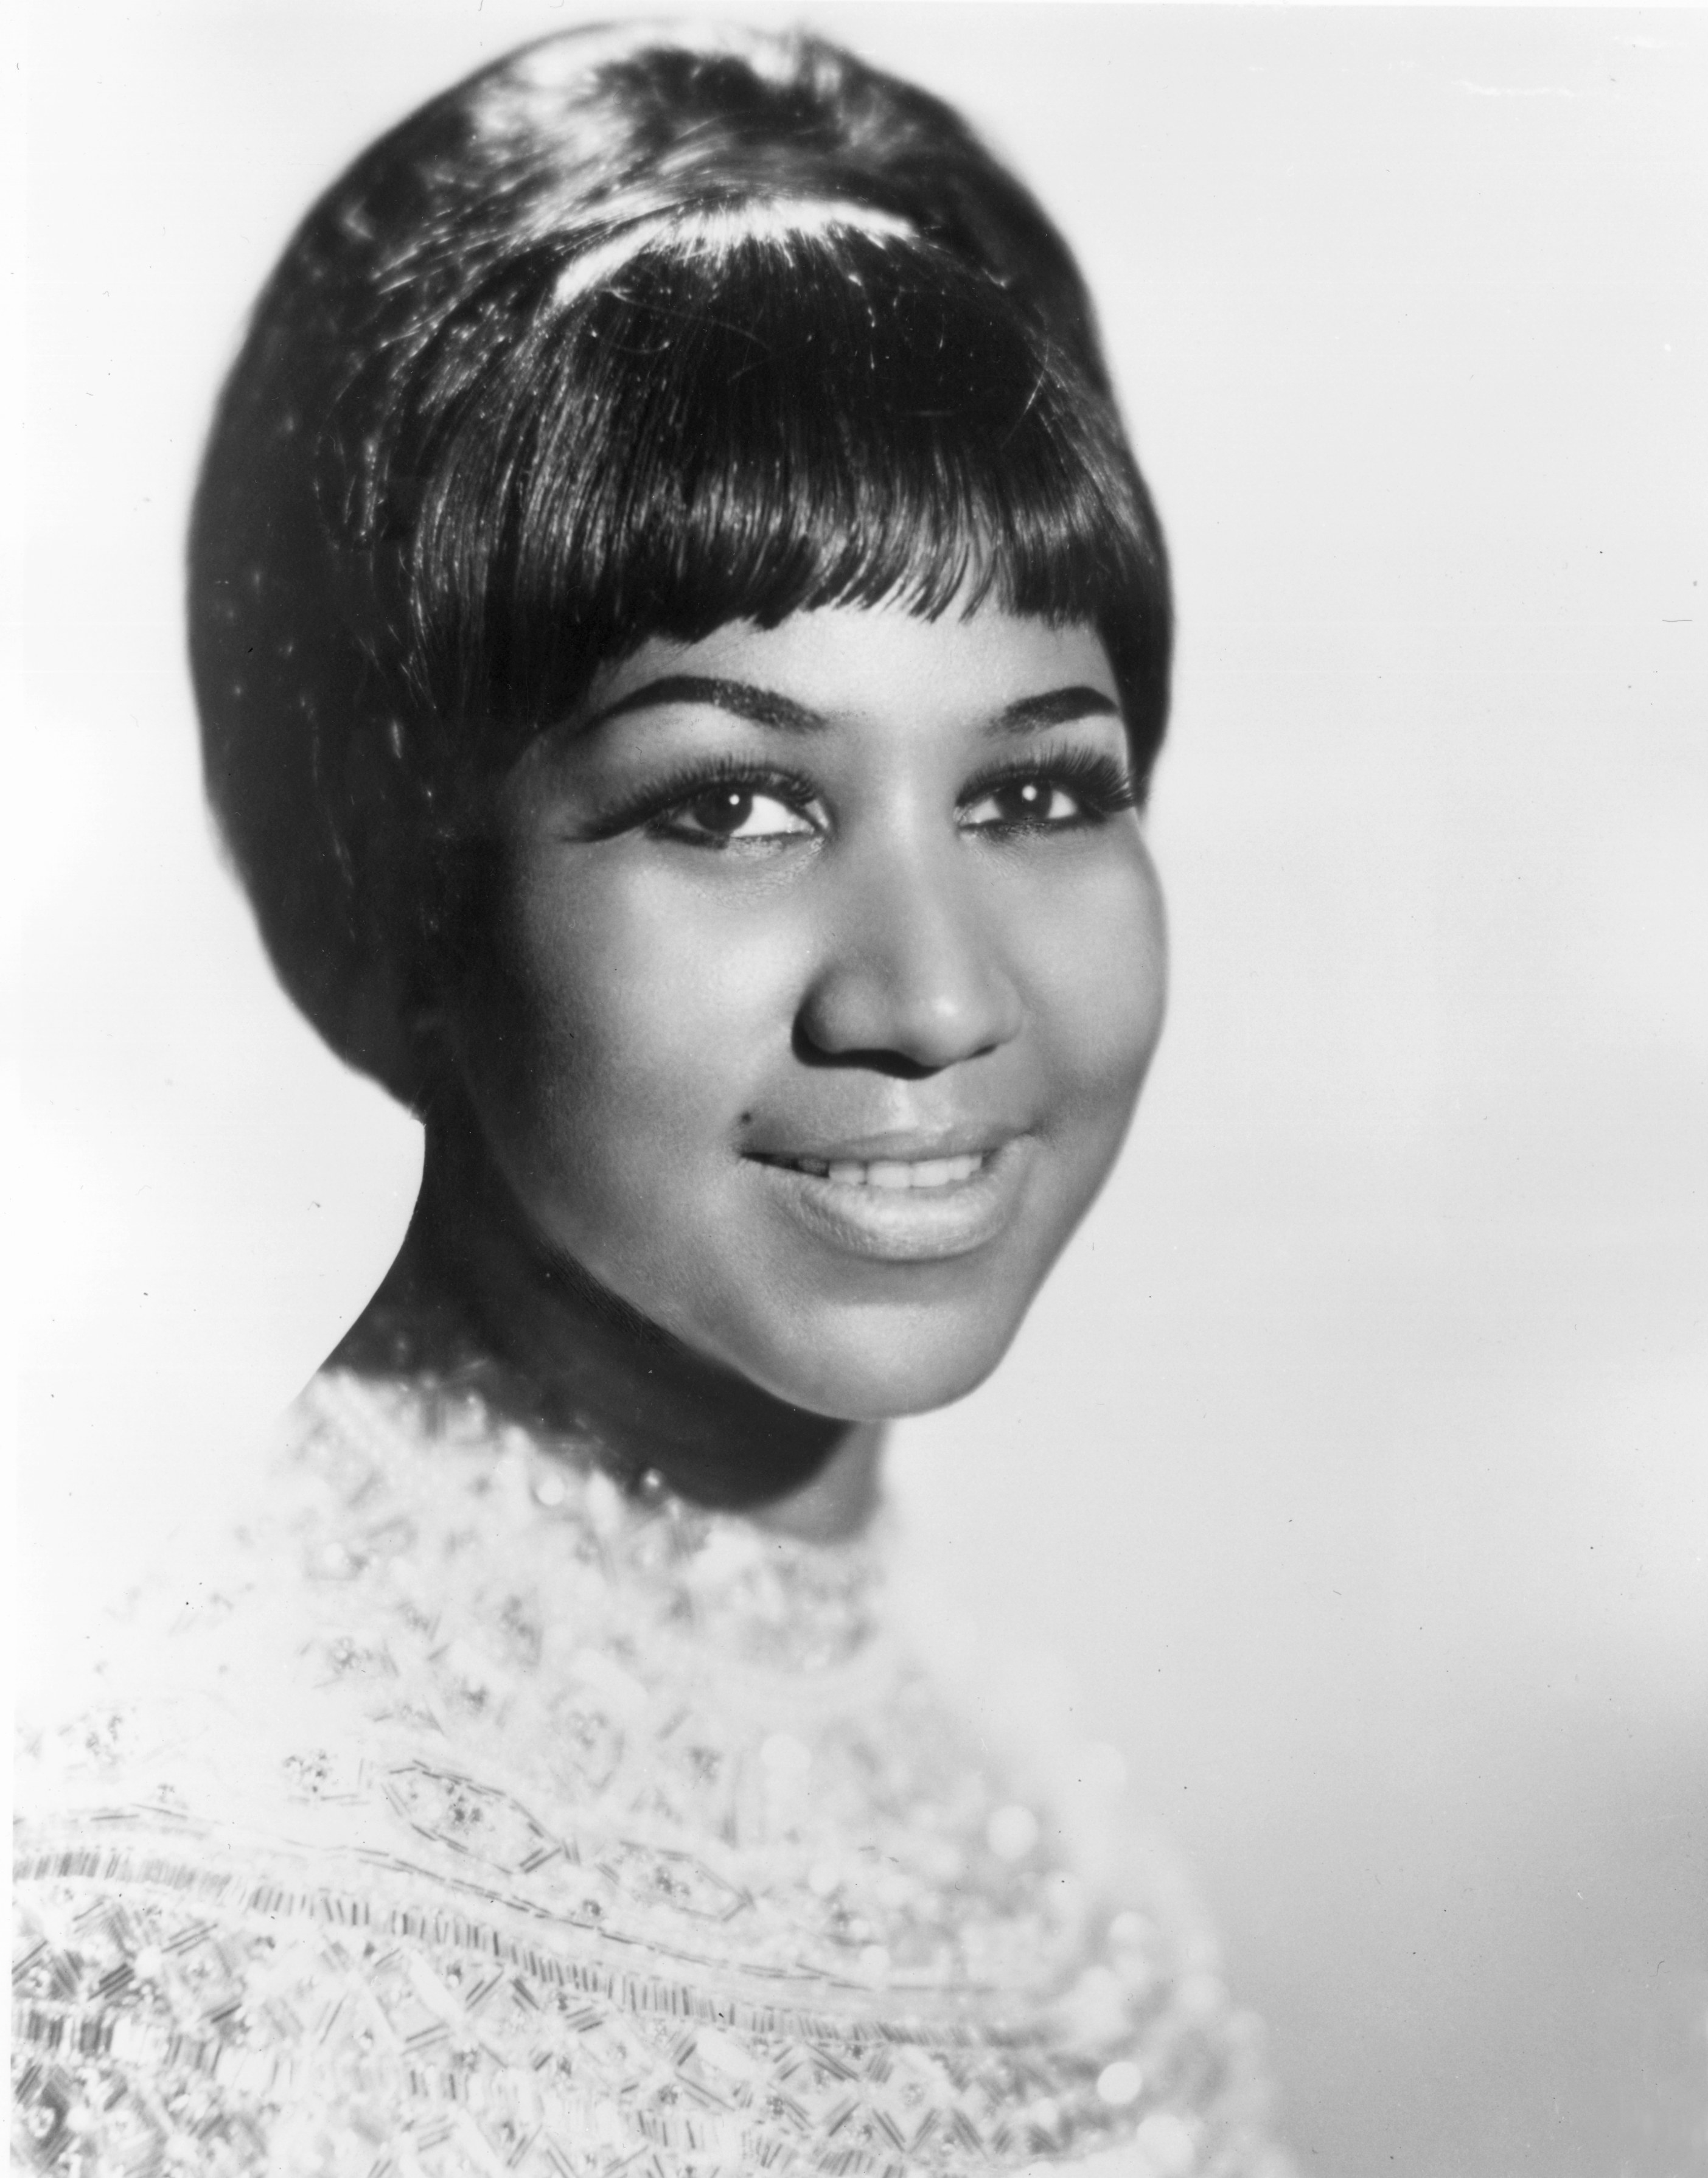 A portrait of a young Aretha Franklin